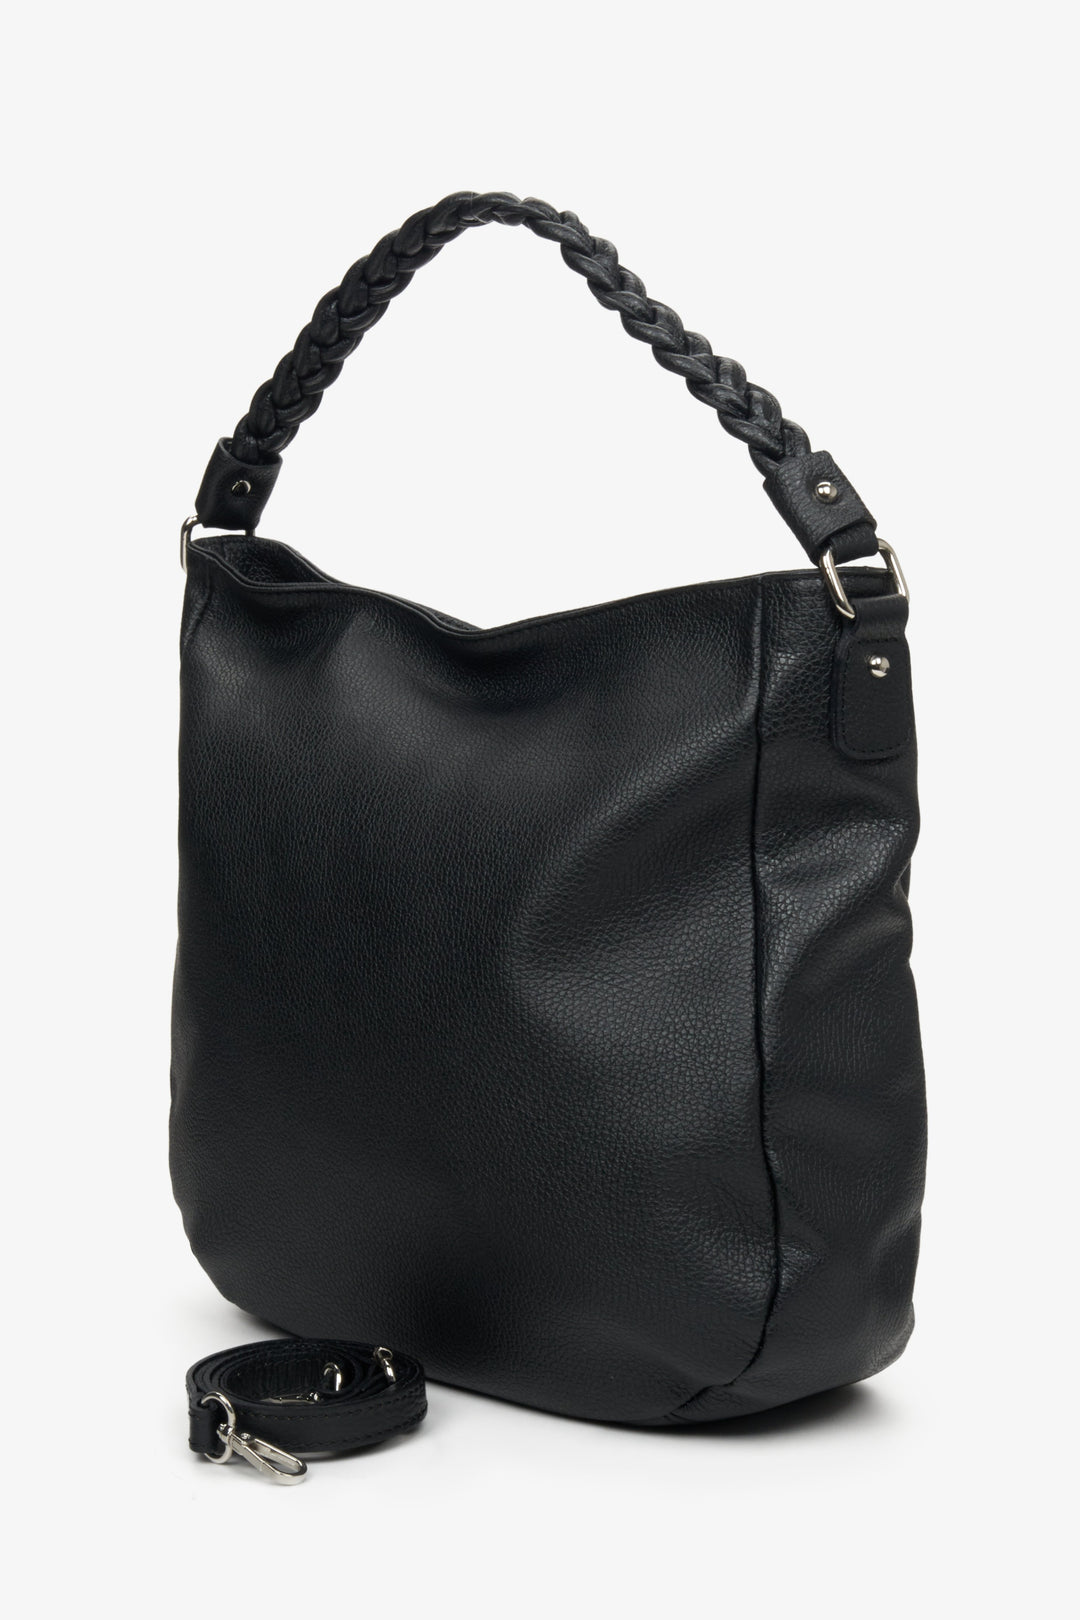 Women's black Estro handbag made of natural leather with extra adjustable strap.